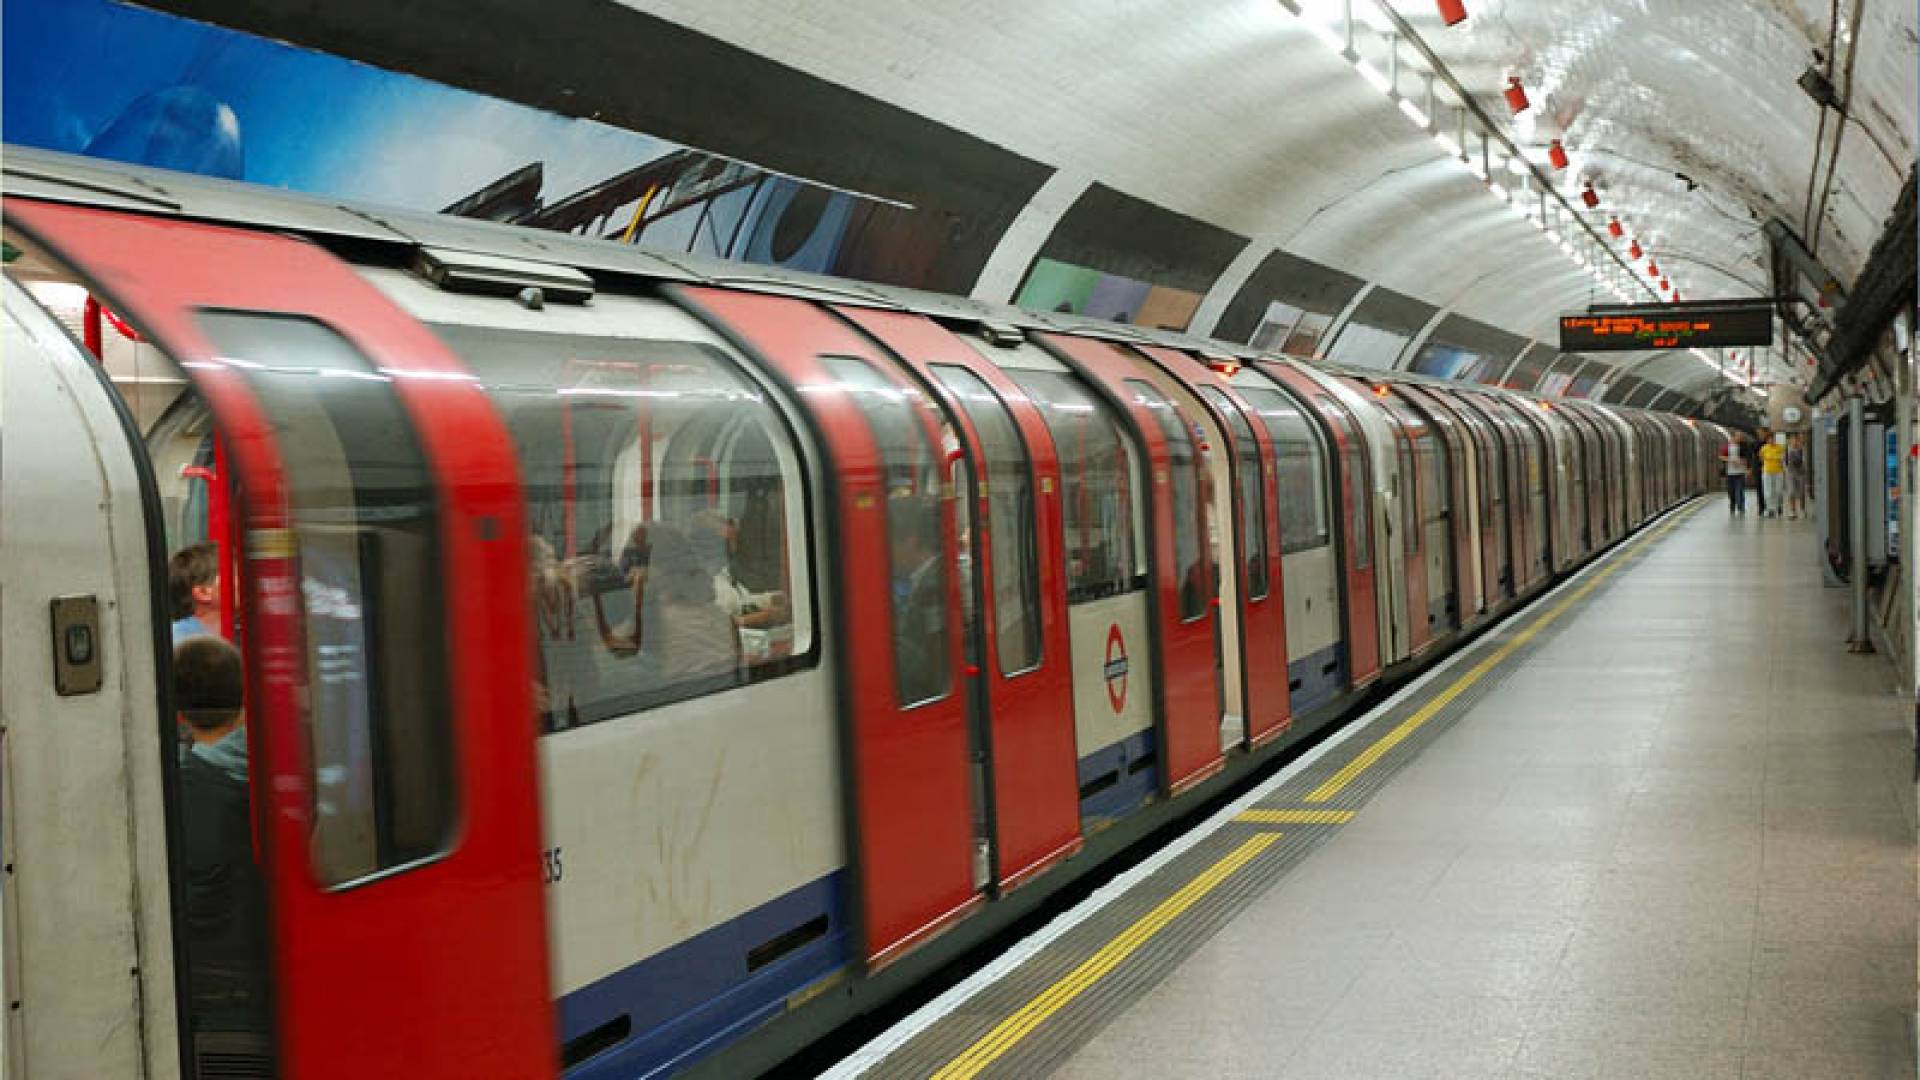 THE TUBE, Introduction